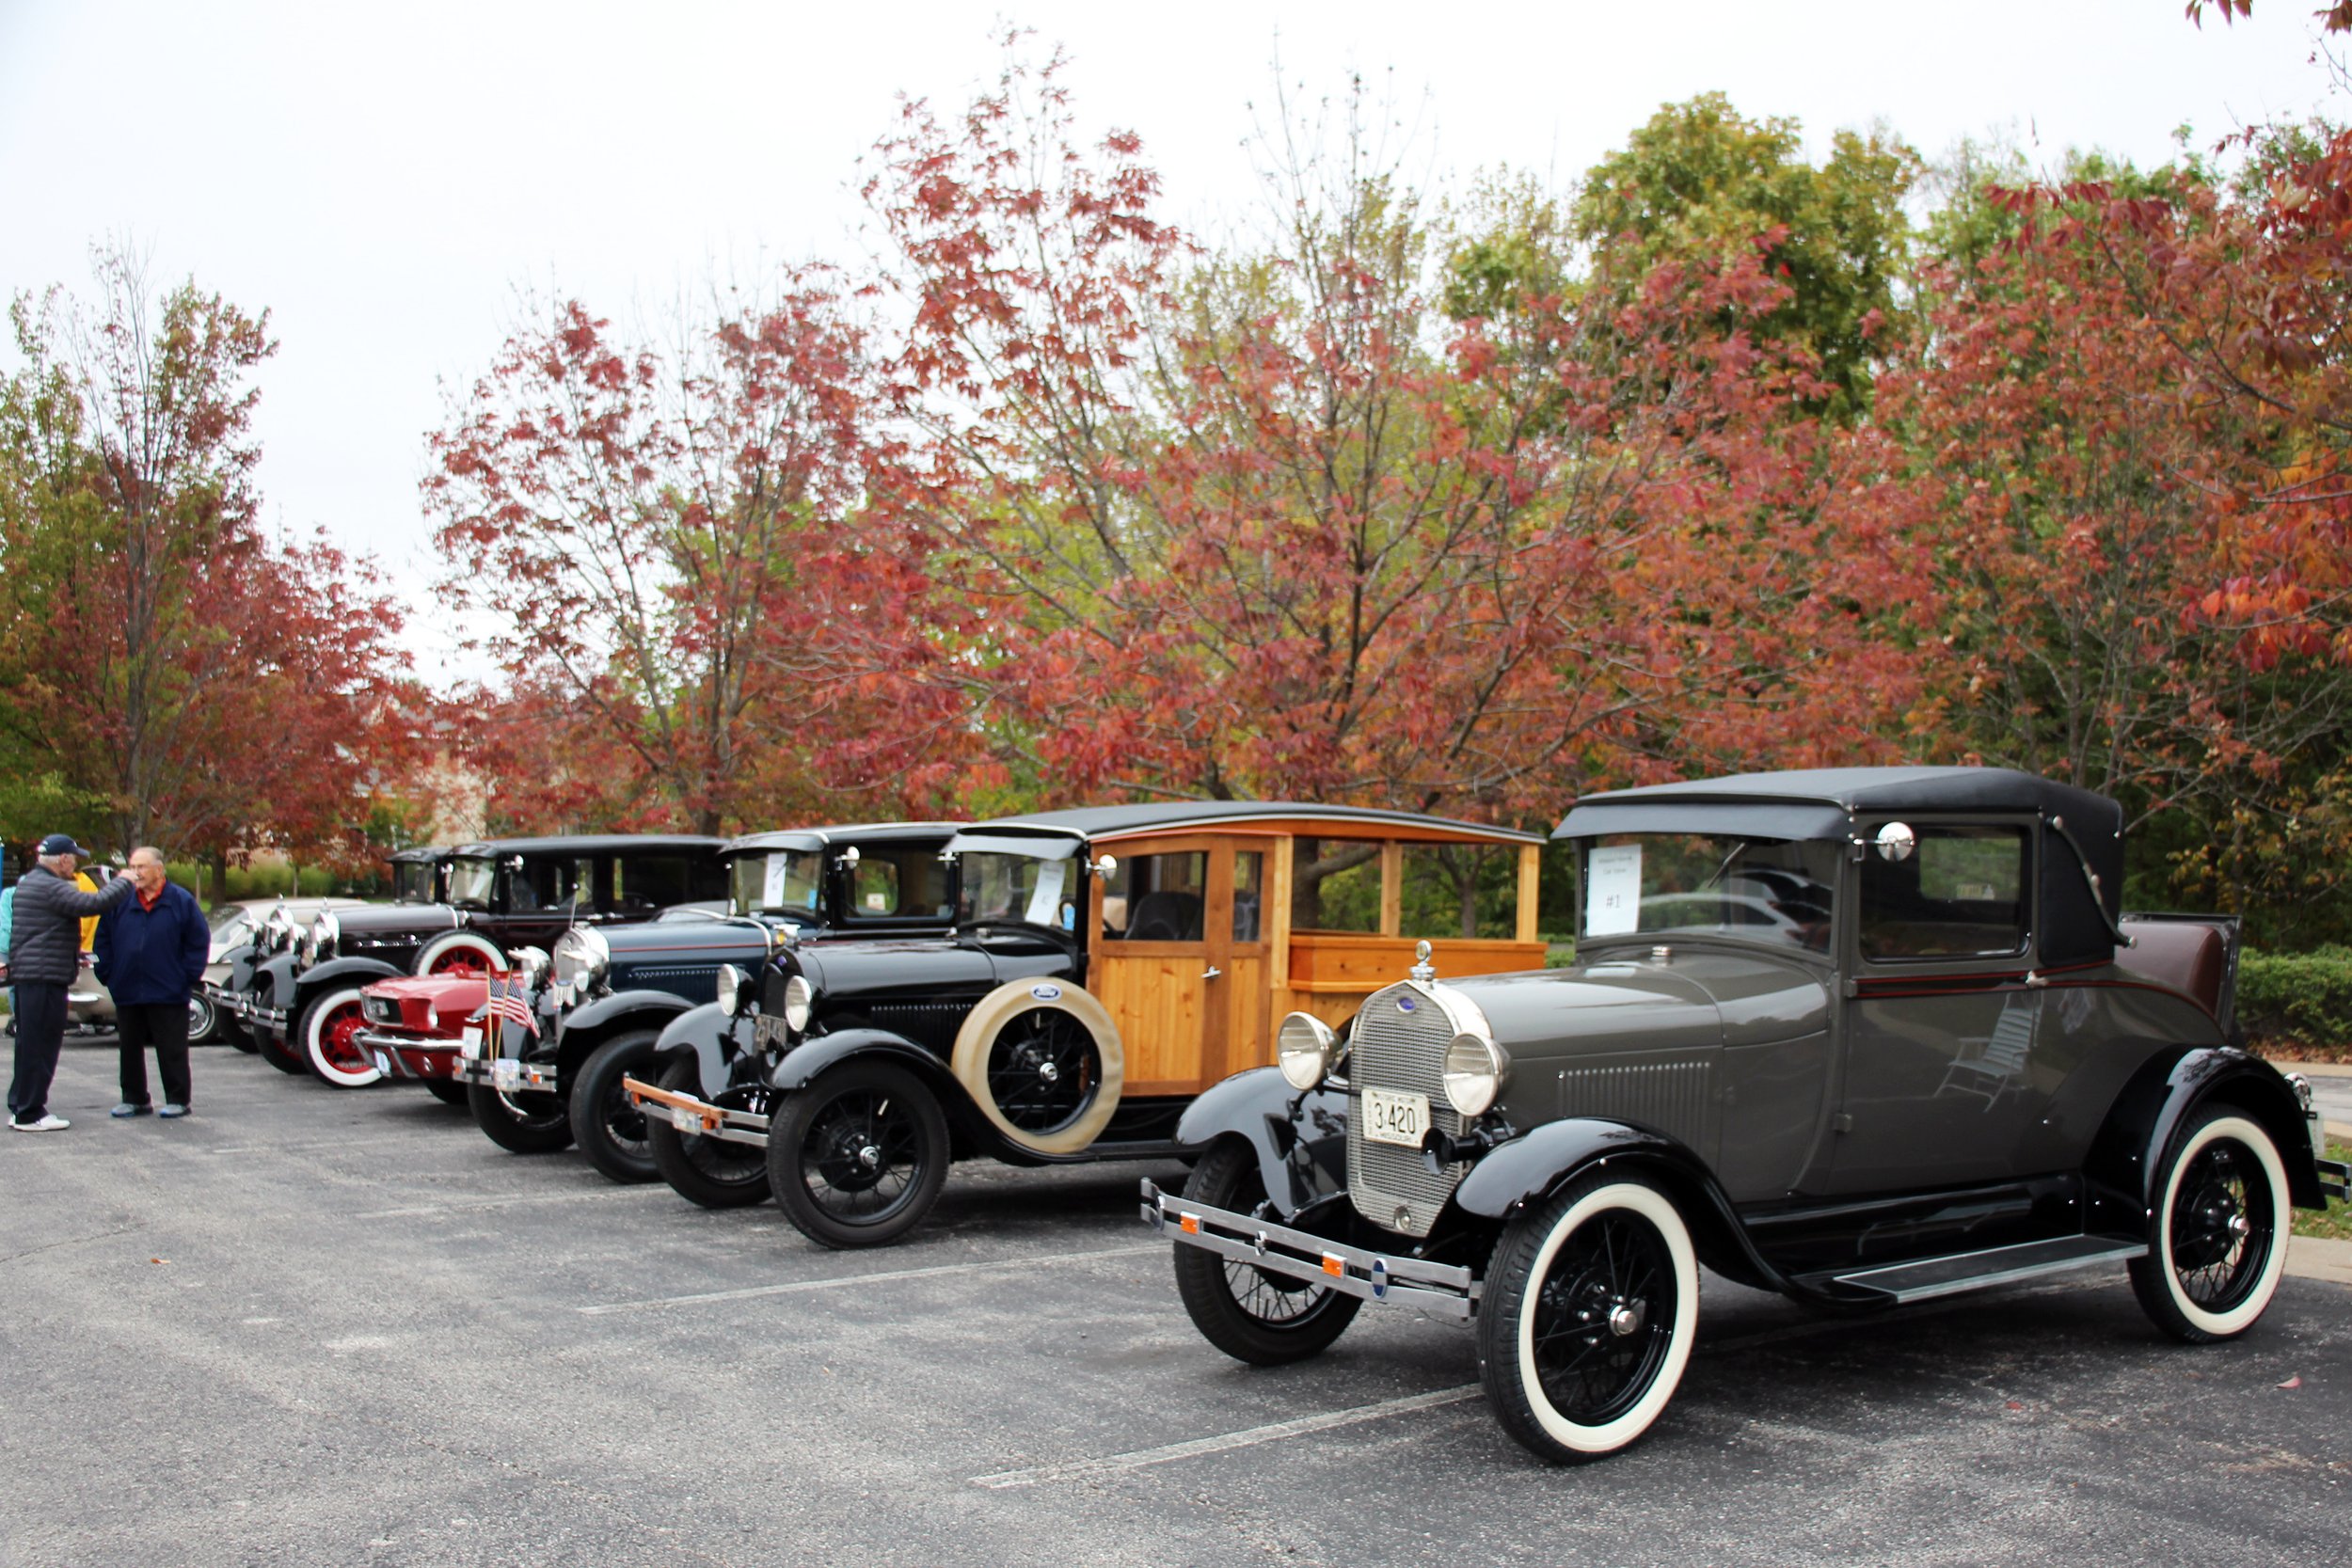    All 5 Model A's that were displayed (as seen from the right)   